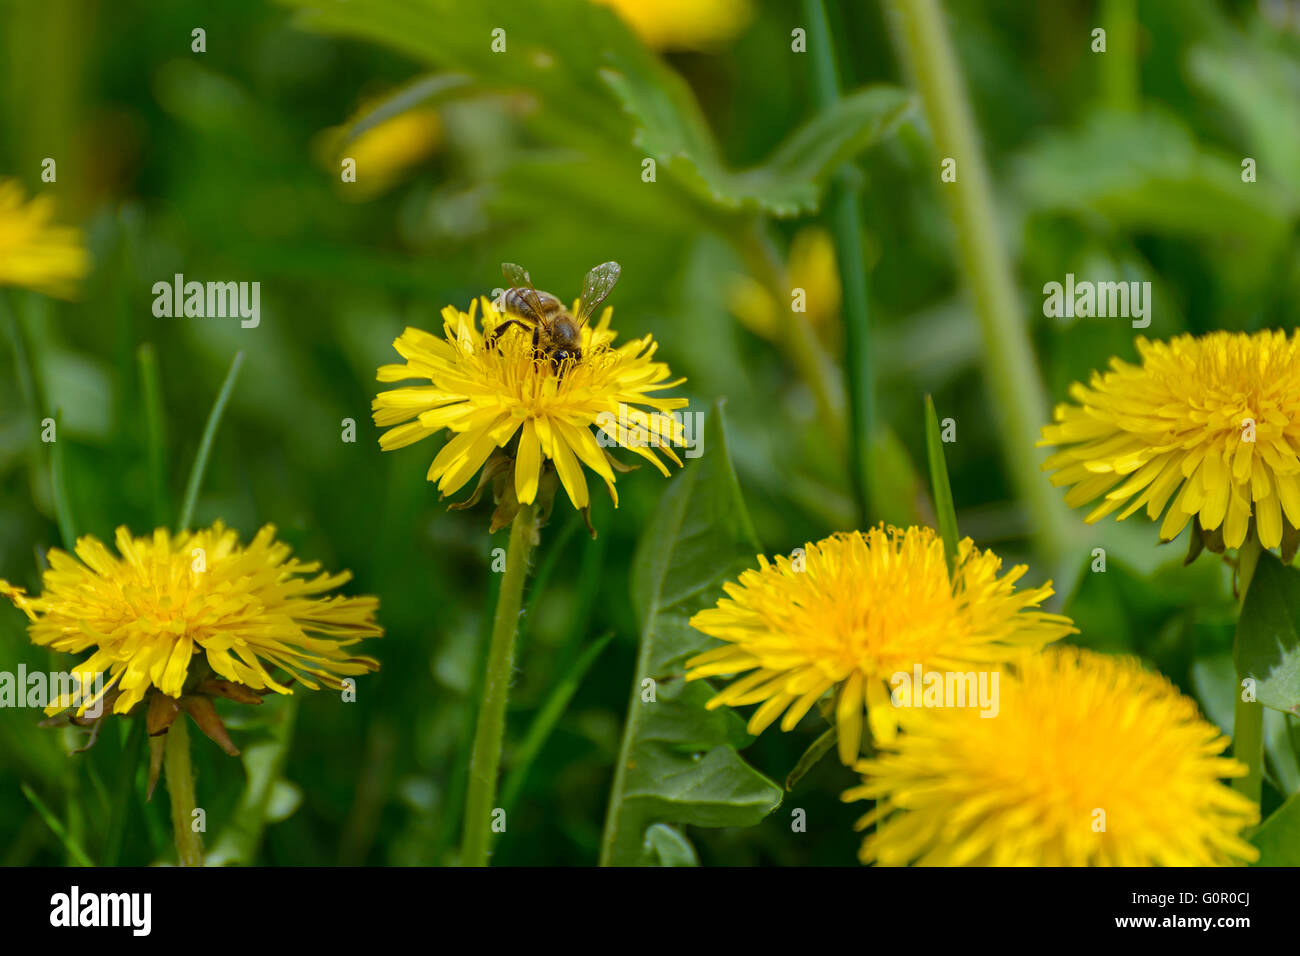 A bee gathers nectar from a dandelion flower Stock Photo